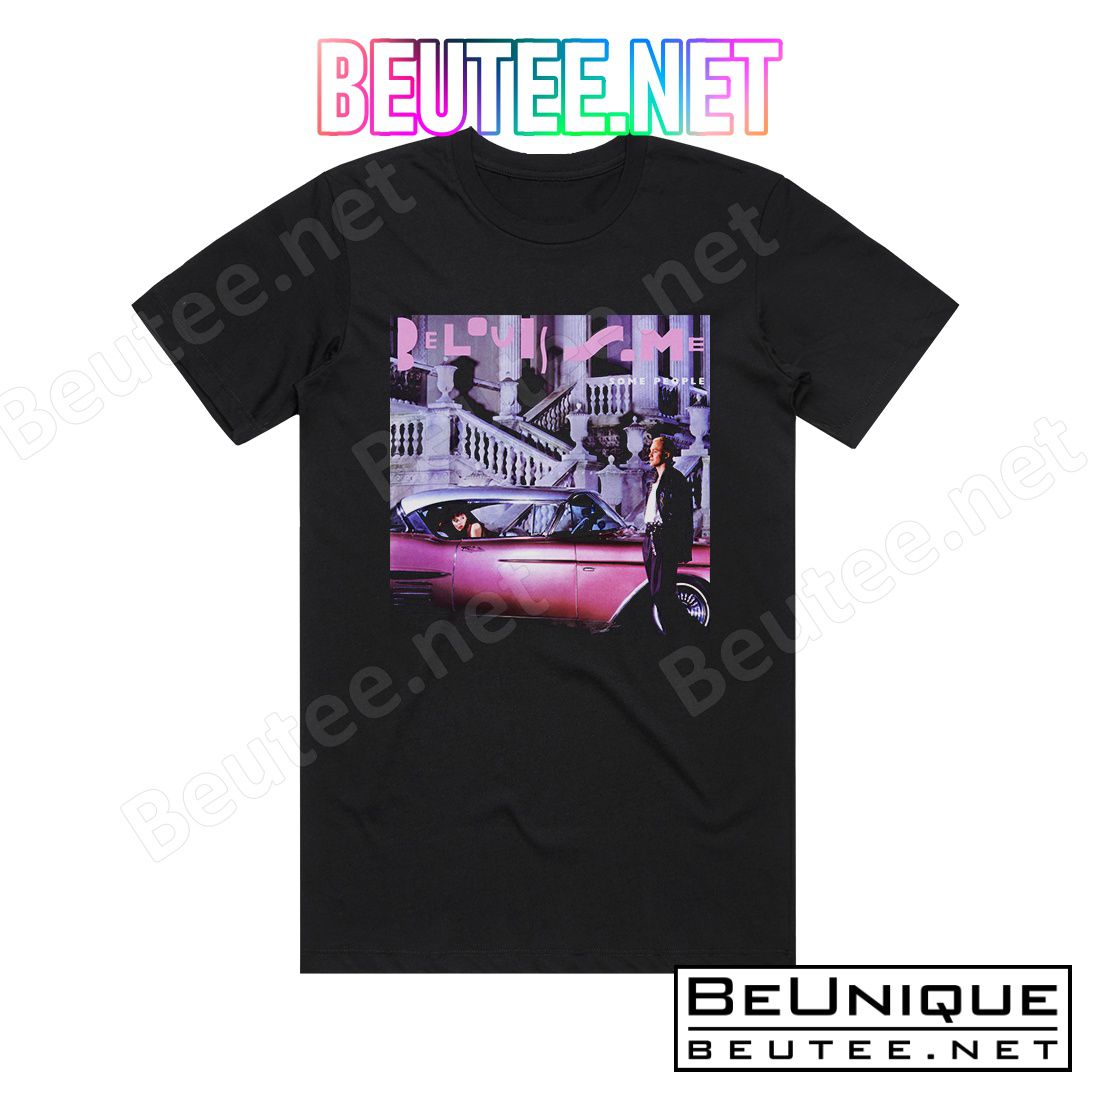 Belouis Some Some People Album Cover T-Shirt